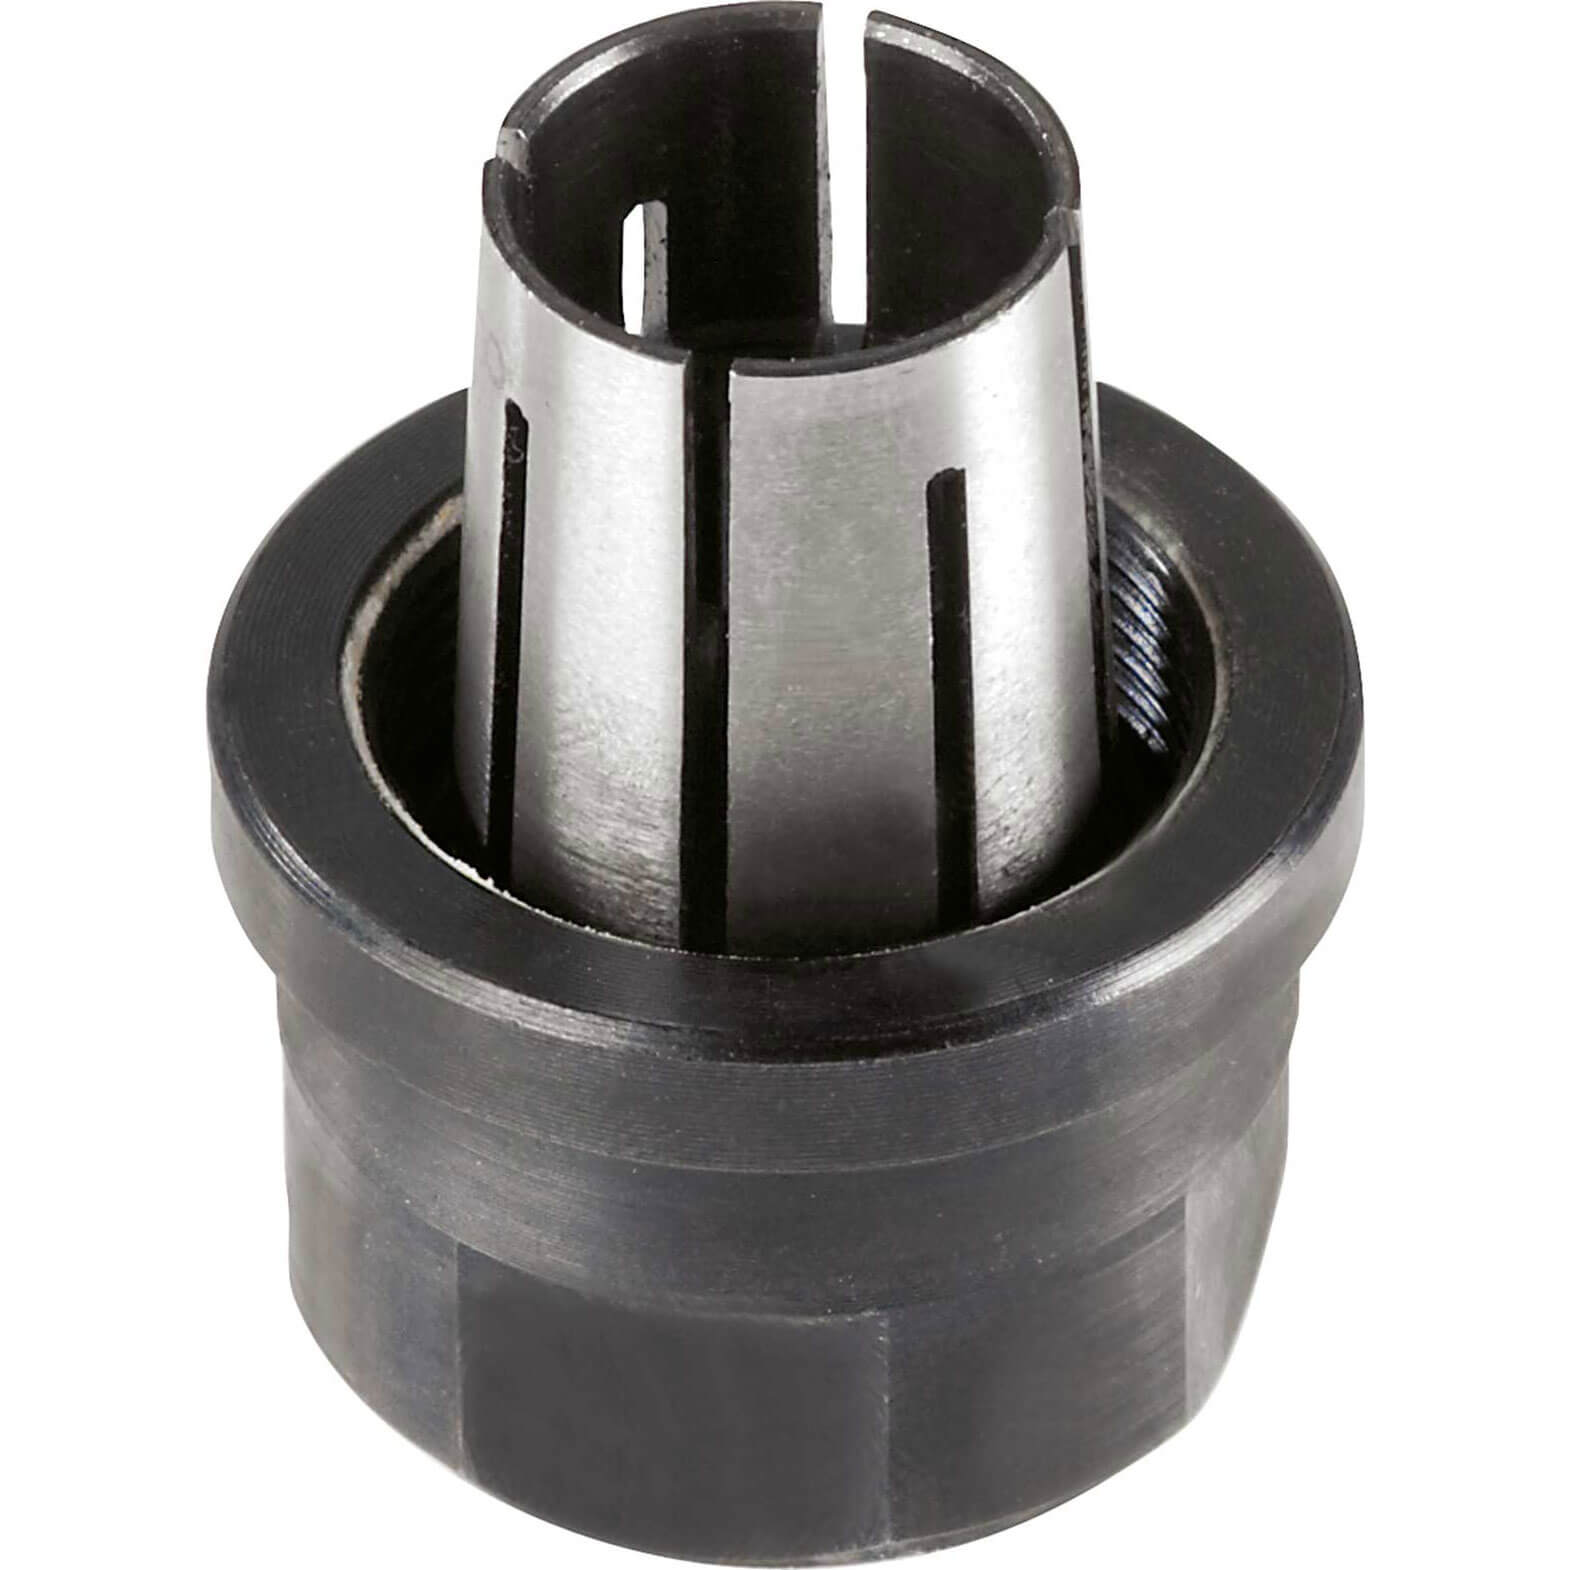 Image of Festool Router Collet For Festool Router OF2200 6mm